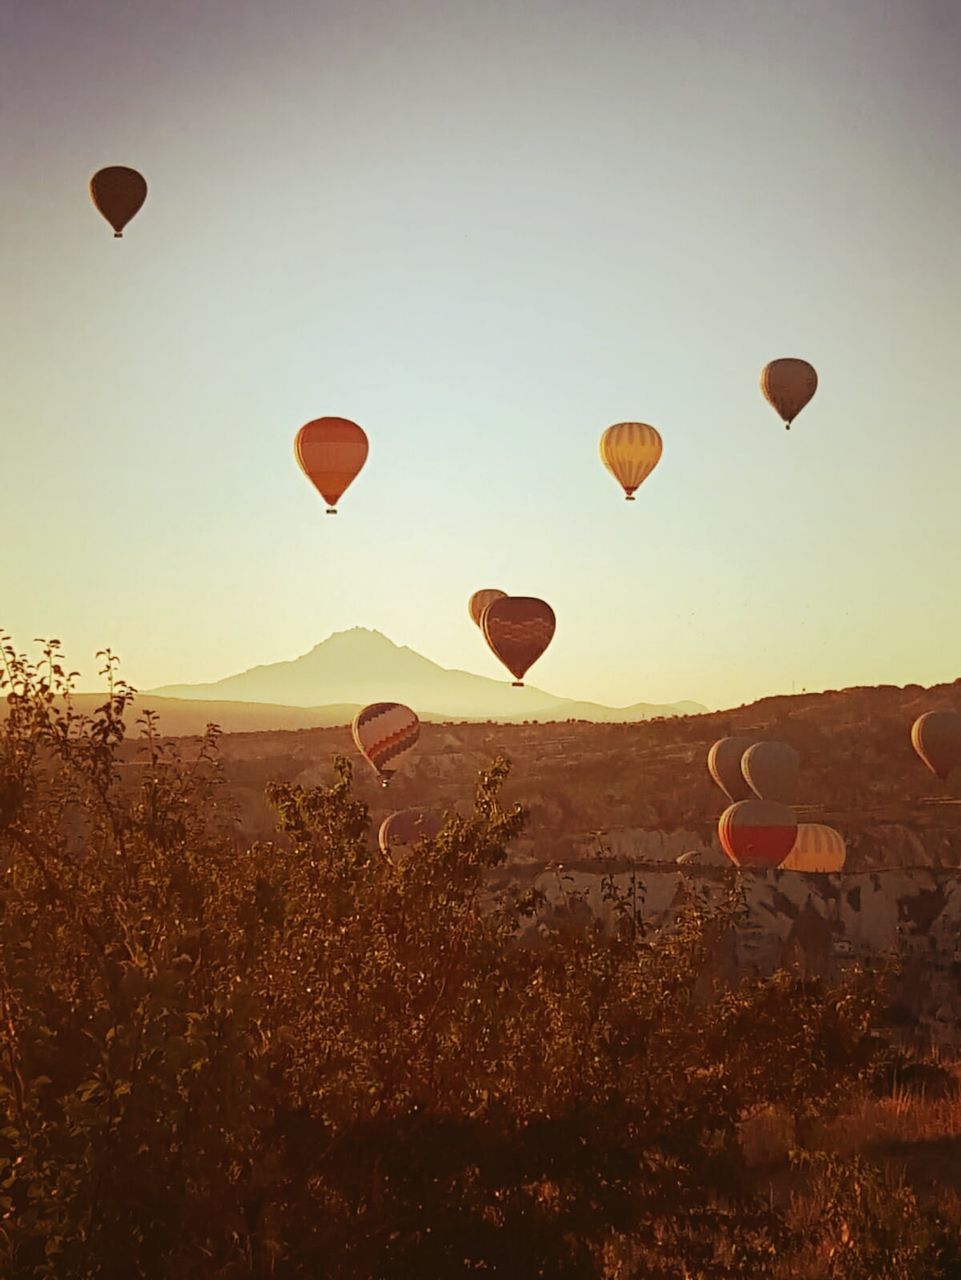 air vehicle, hot air balloon, transportation, balloon, sky, mode of transportation, nature, mid-air, landscape, flying, adventure, environment, travel, scenics - nature, no people, land, beauty in nature, mountain, sun, tranquil scene, freedom, outdoors, ballooning festival